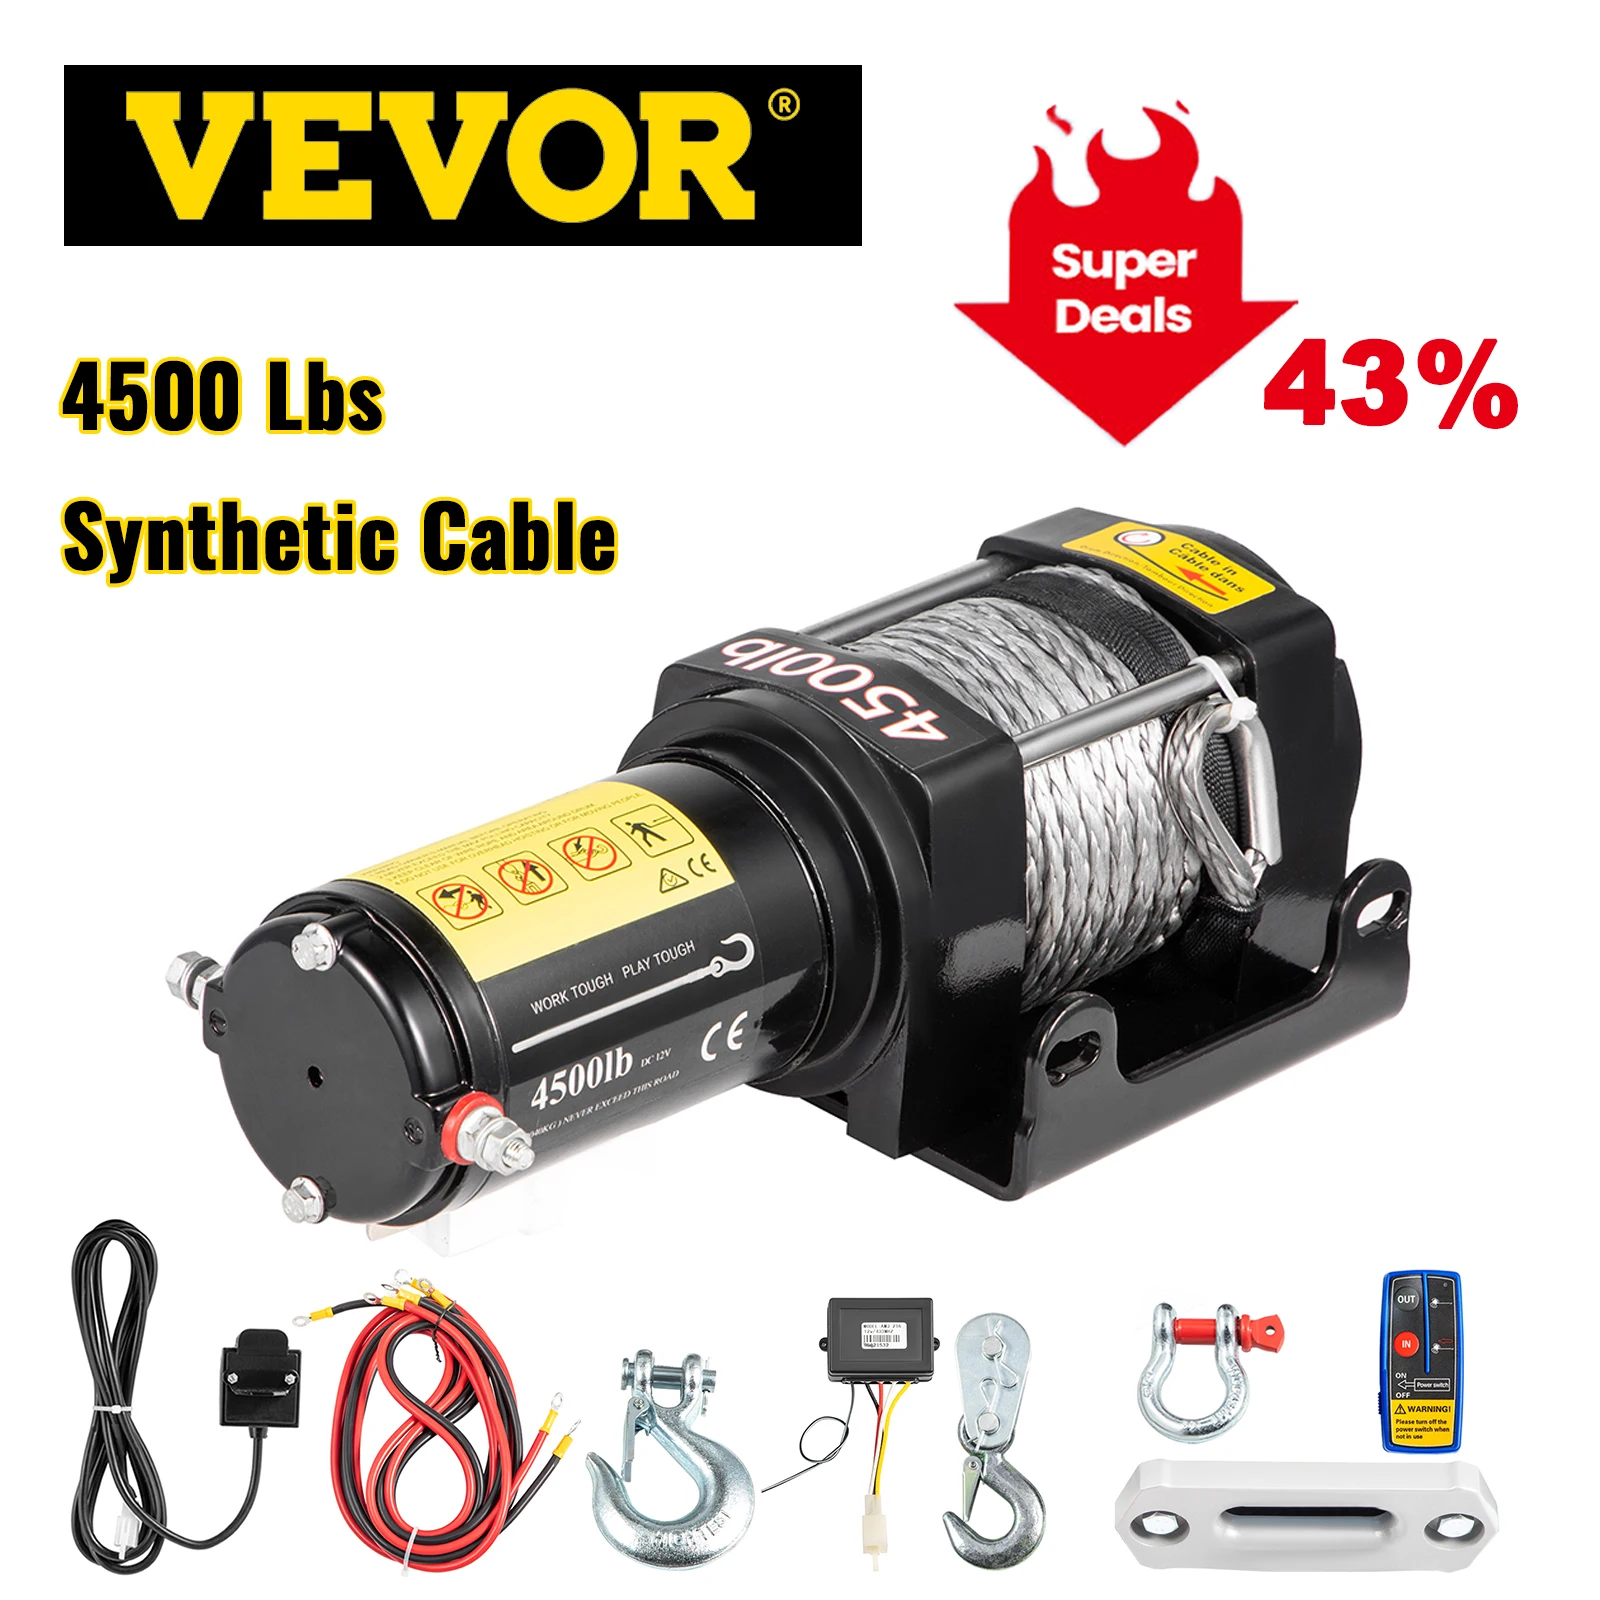 VEVOR 4500LBS/2040KG Strong Synthetic Rope Electric Winch Wireless Control for SUV Boat Truck Trailer Recovery Off Road Winch